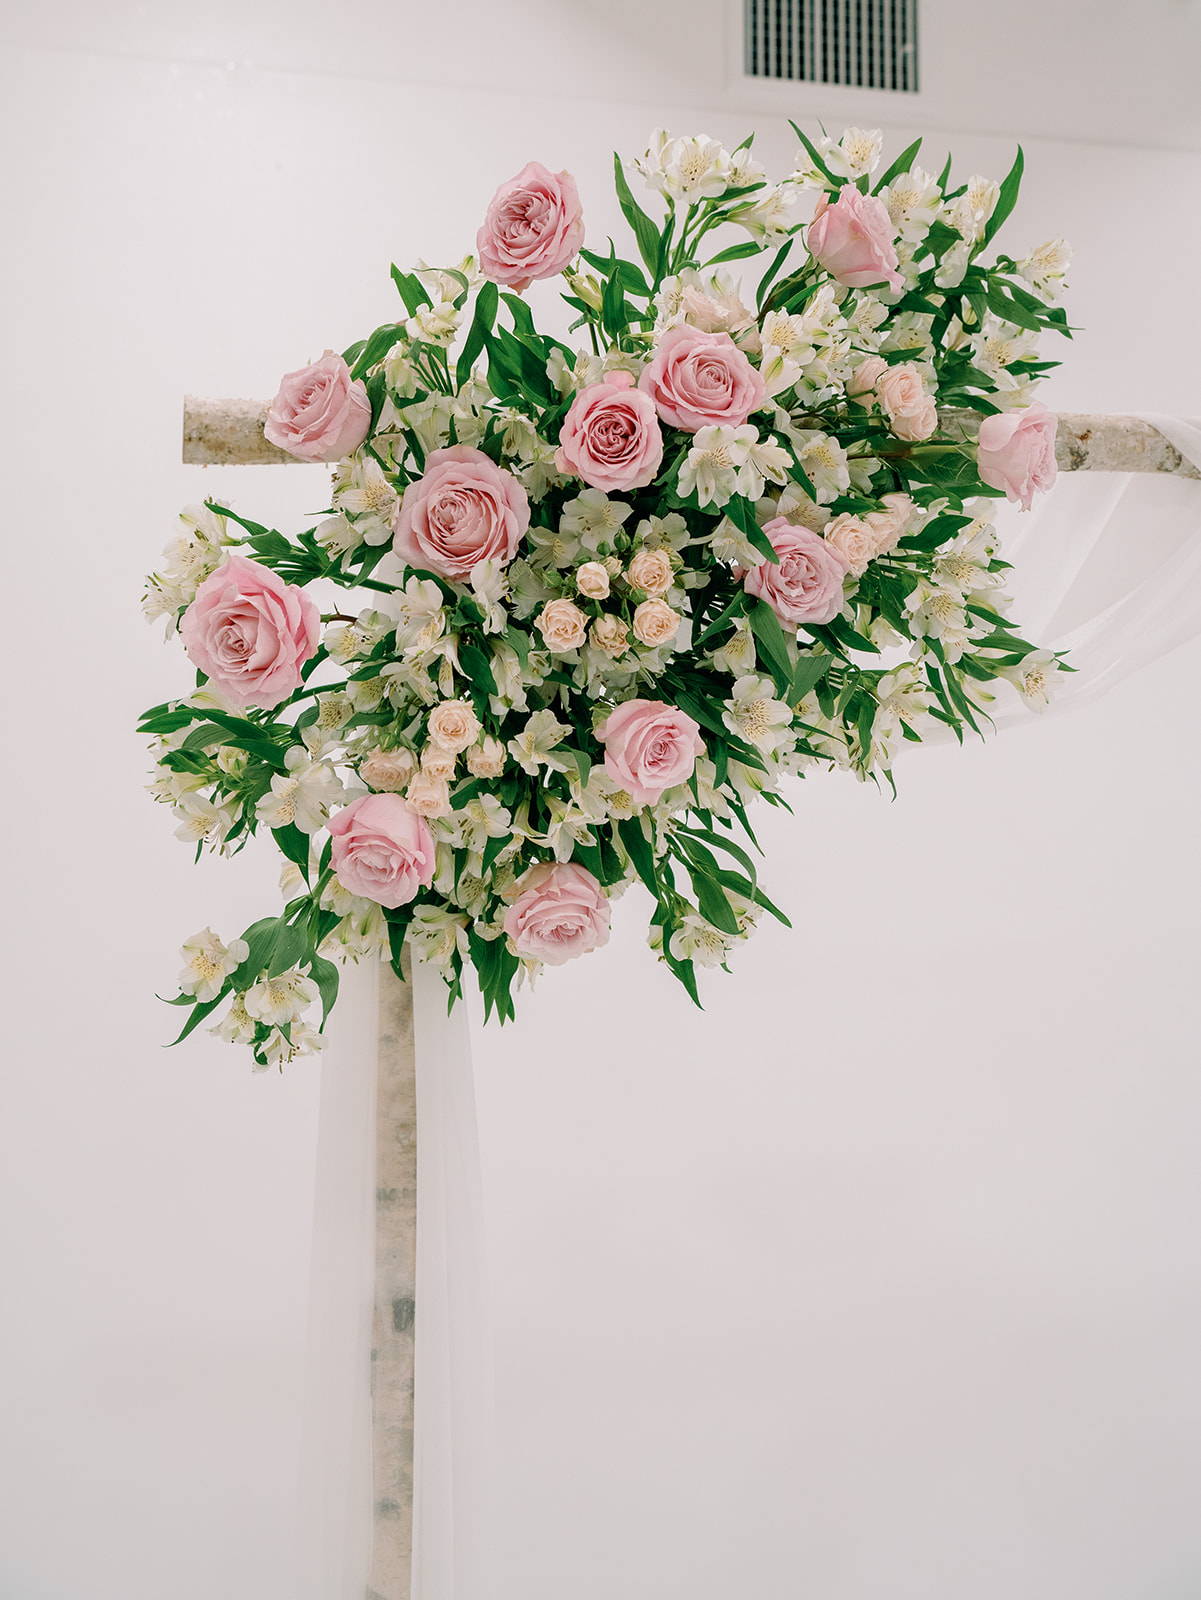 Small White Wedding Arch Flowers